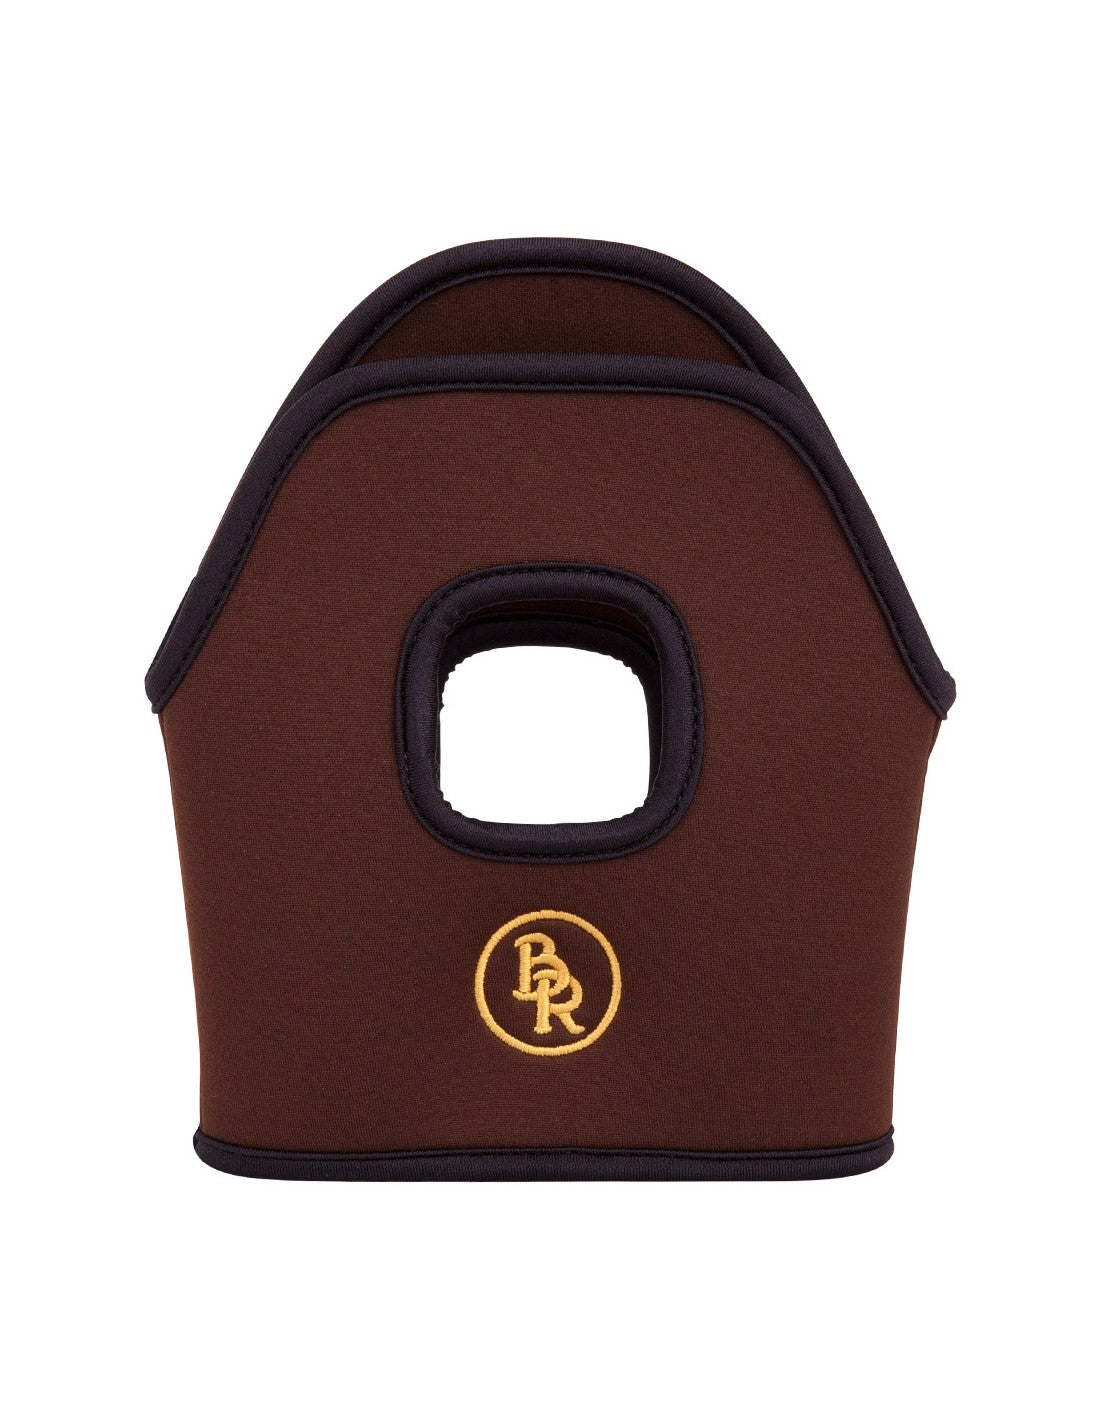 BR Equestrian Stirrup Covers Brown